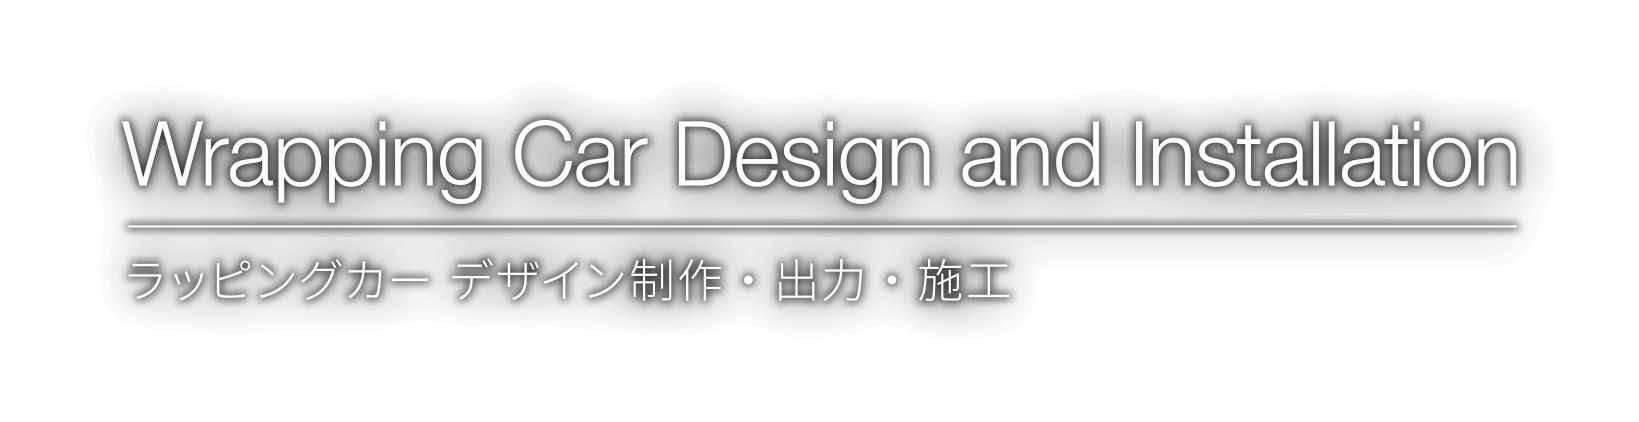 Wrapping Car Design and Installation ラッピングカーデザイン制作・出力・施工